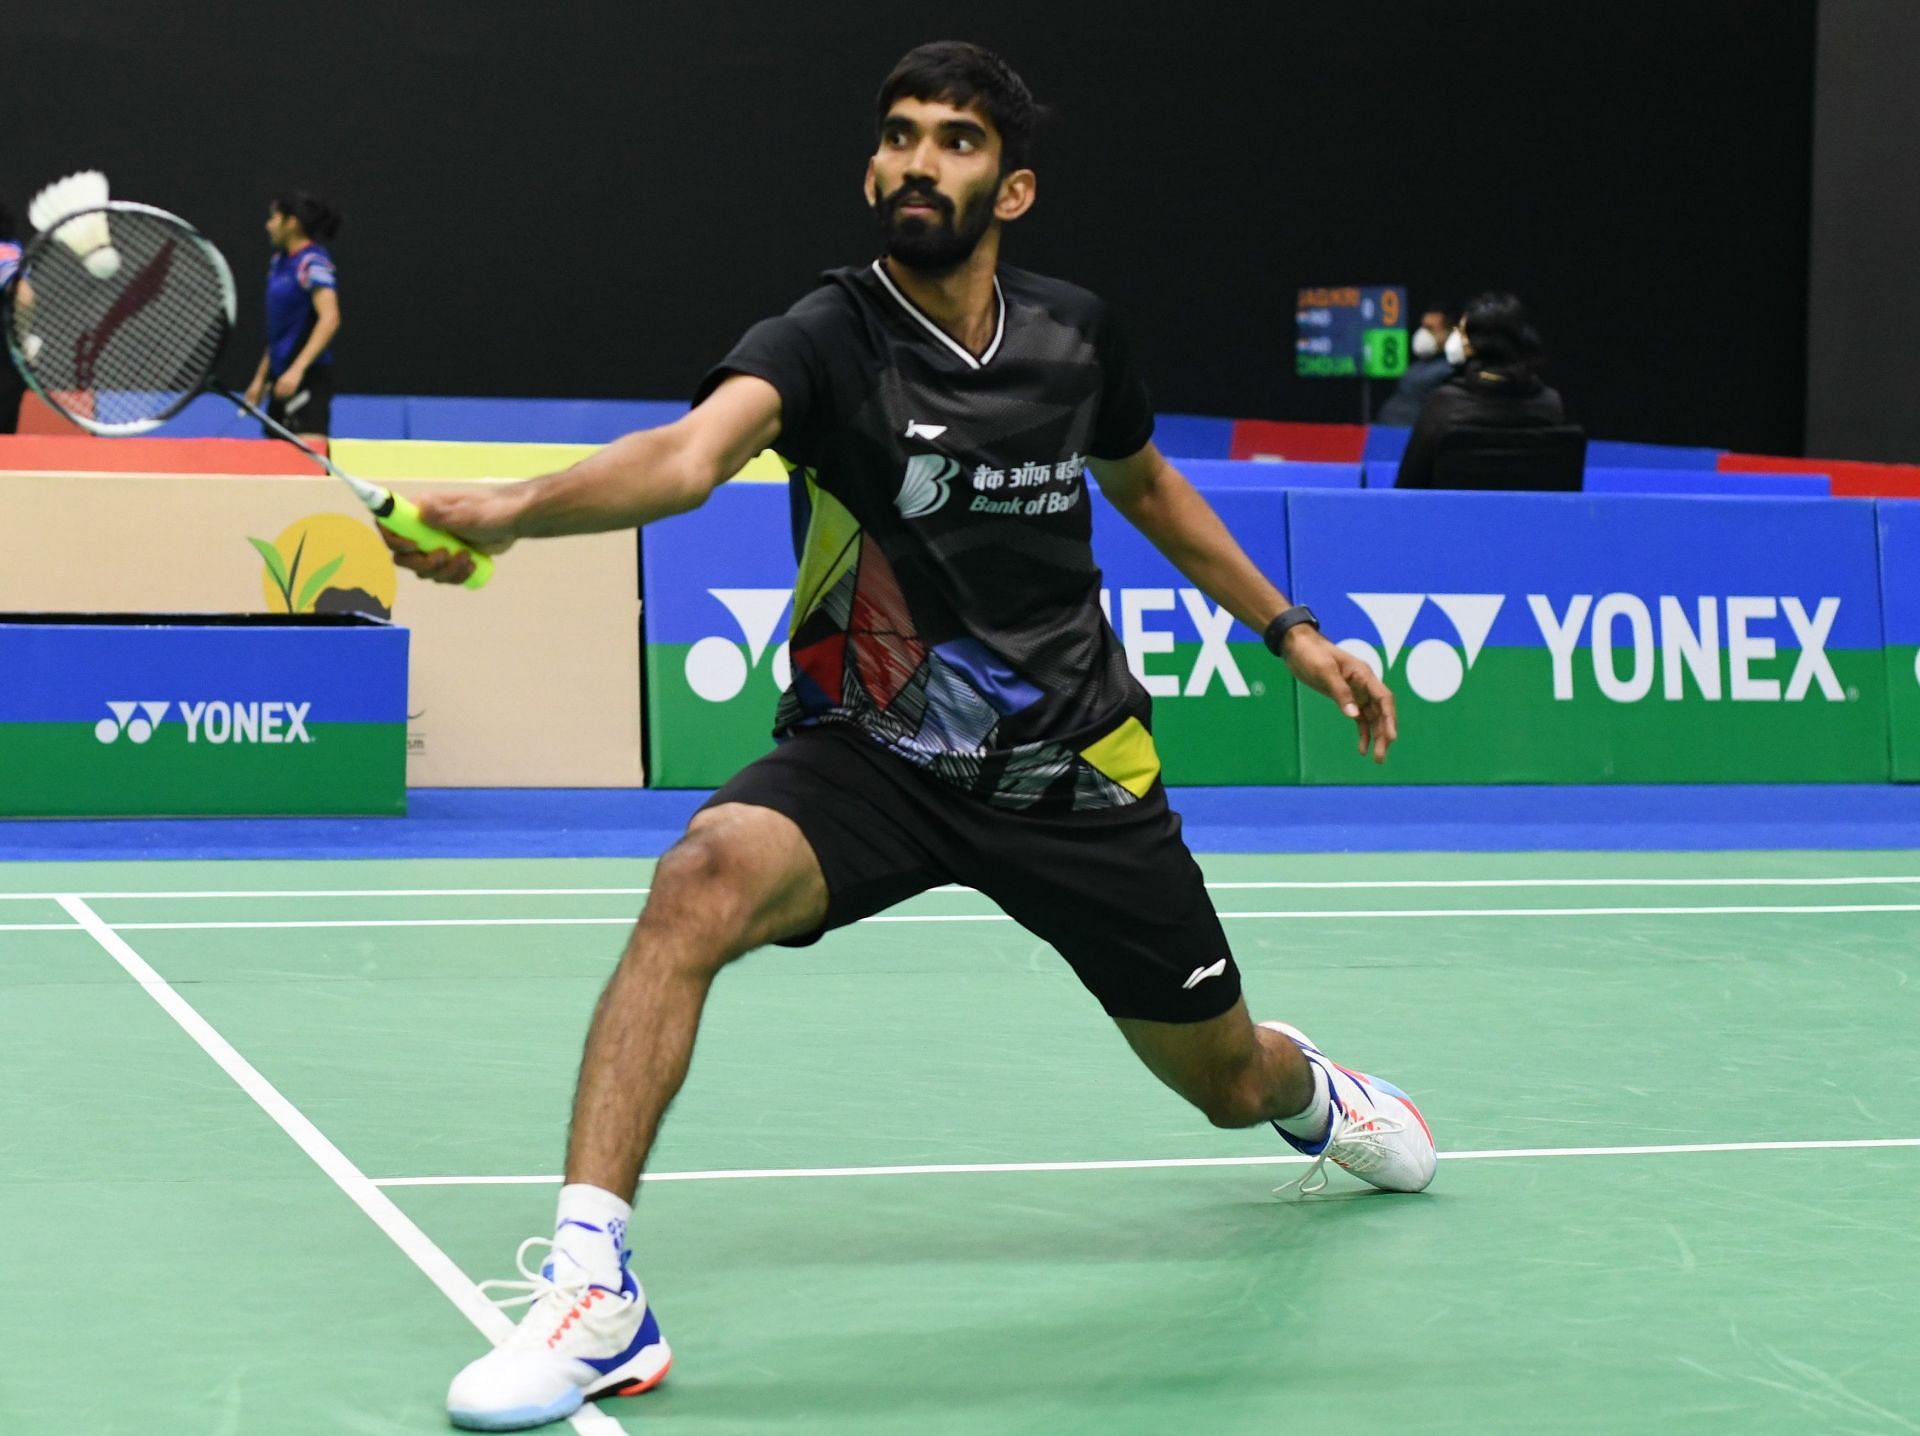 Kidambi Srikanth beat Ying Xiang Lin 21-14, 21-13 to help India register 4-1 win against Australia in the Commonwealth Games in Birmingham. (Pic credit: BAI)